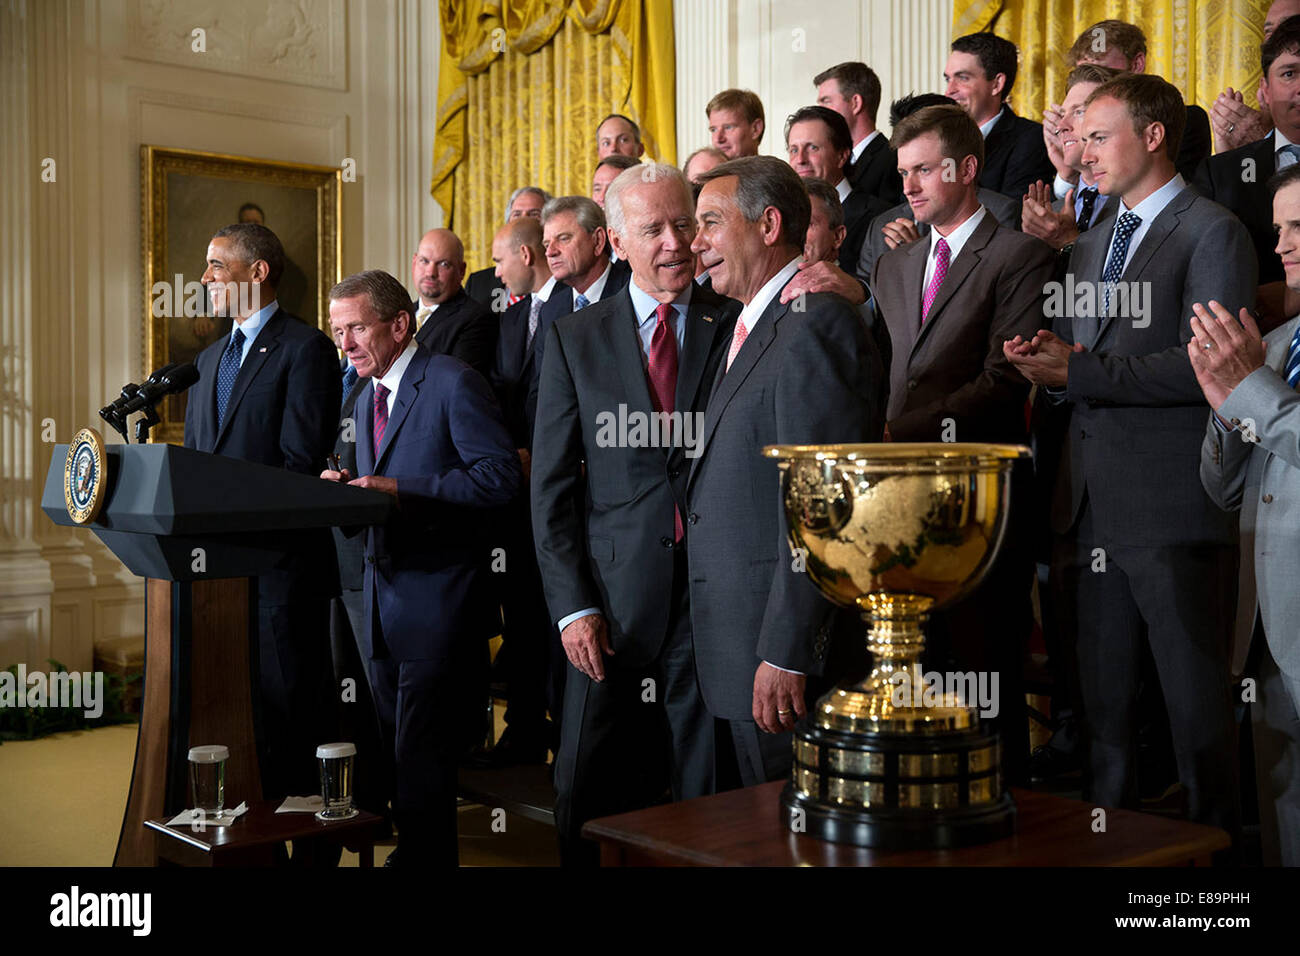 Vice President Joe Biden puts his arm around House Speaker John Boehner, R-Ohio, as PGA Tour Commissioner Tim Finchem introduces President Barack Obama during an event for the 2013 President's Cup championship teams in the East Room of the White House, Ju Stock Photo